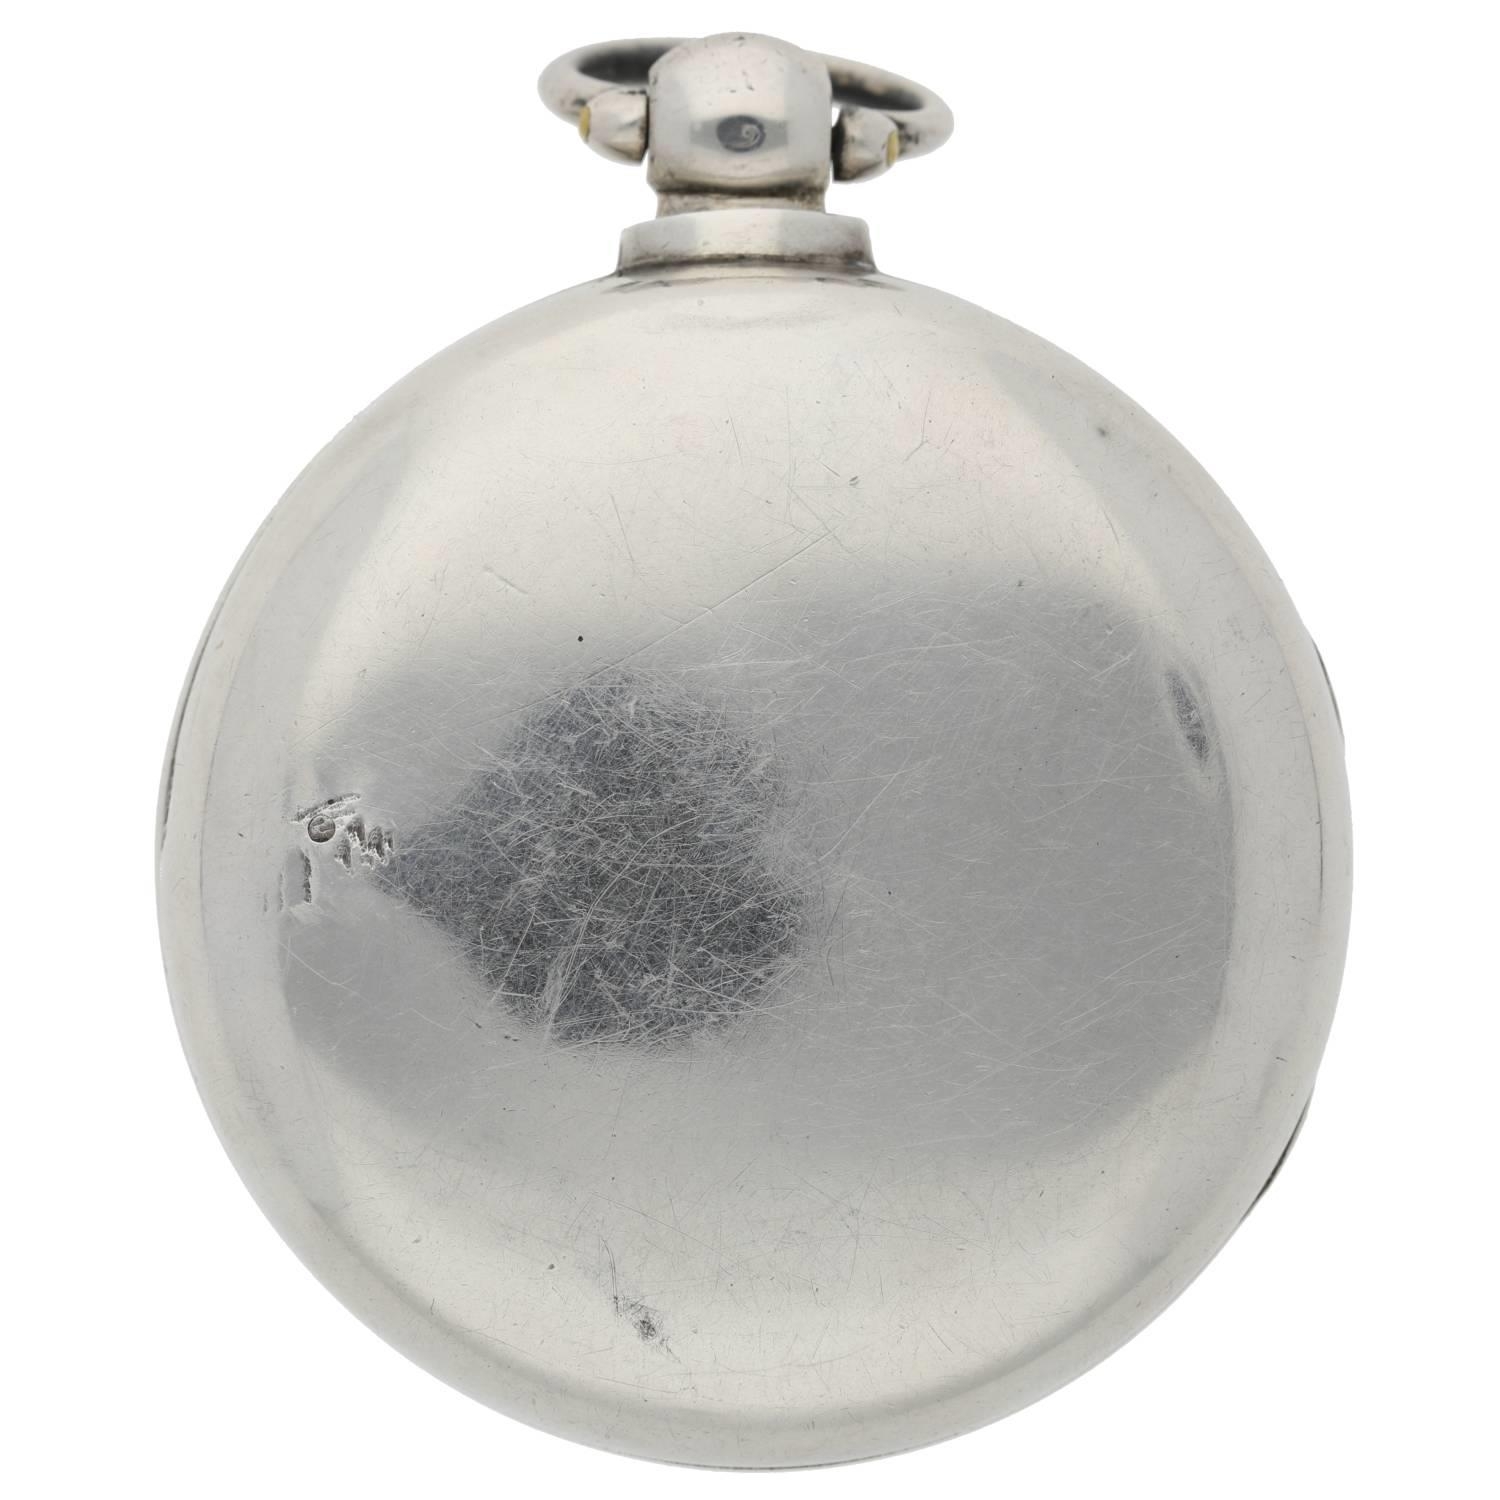 John Callcott, Cotton - rare 19th century English silver pair cased verge pocket watch, signed fusee - Image 8 of 10